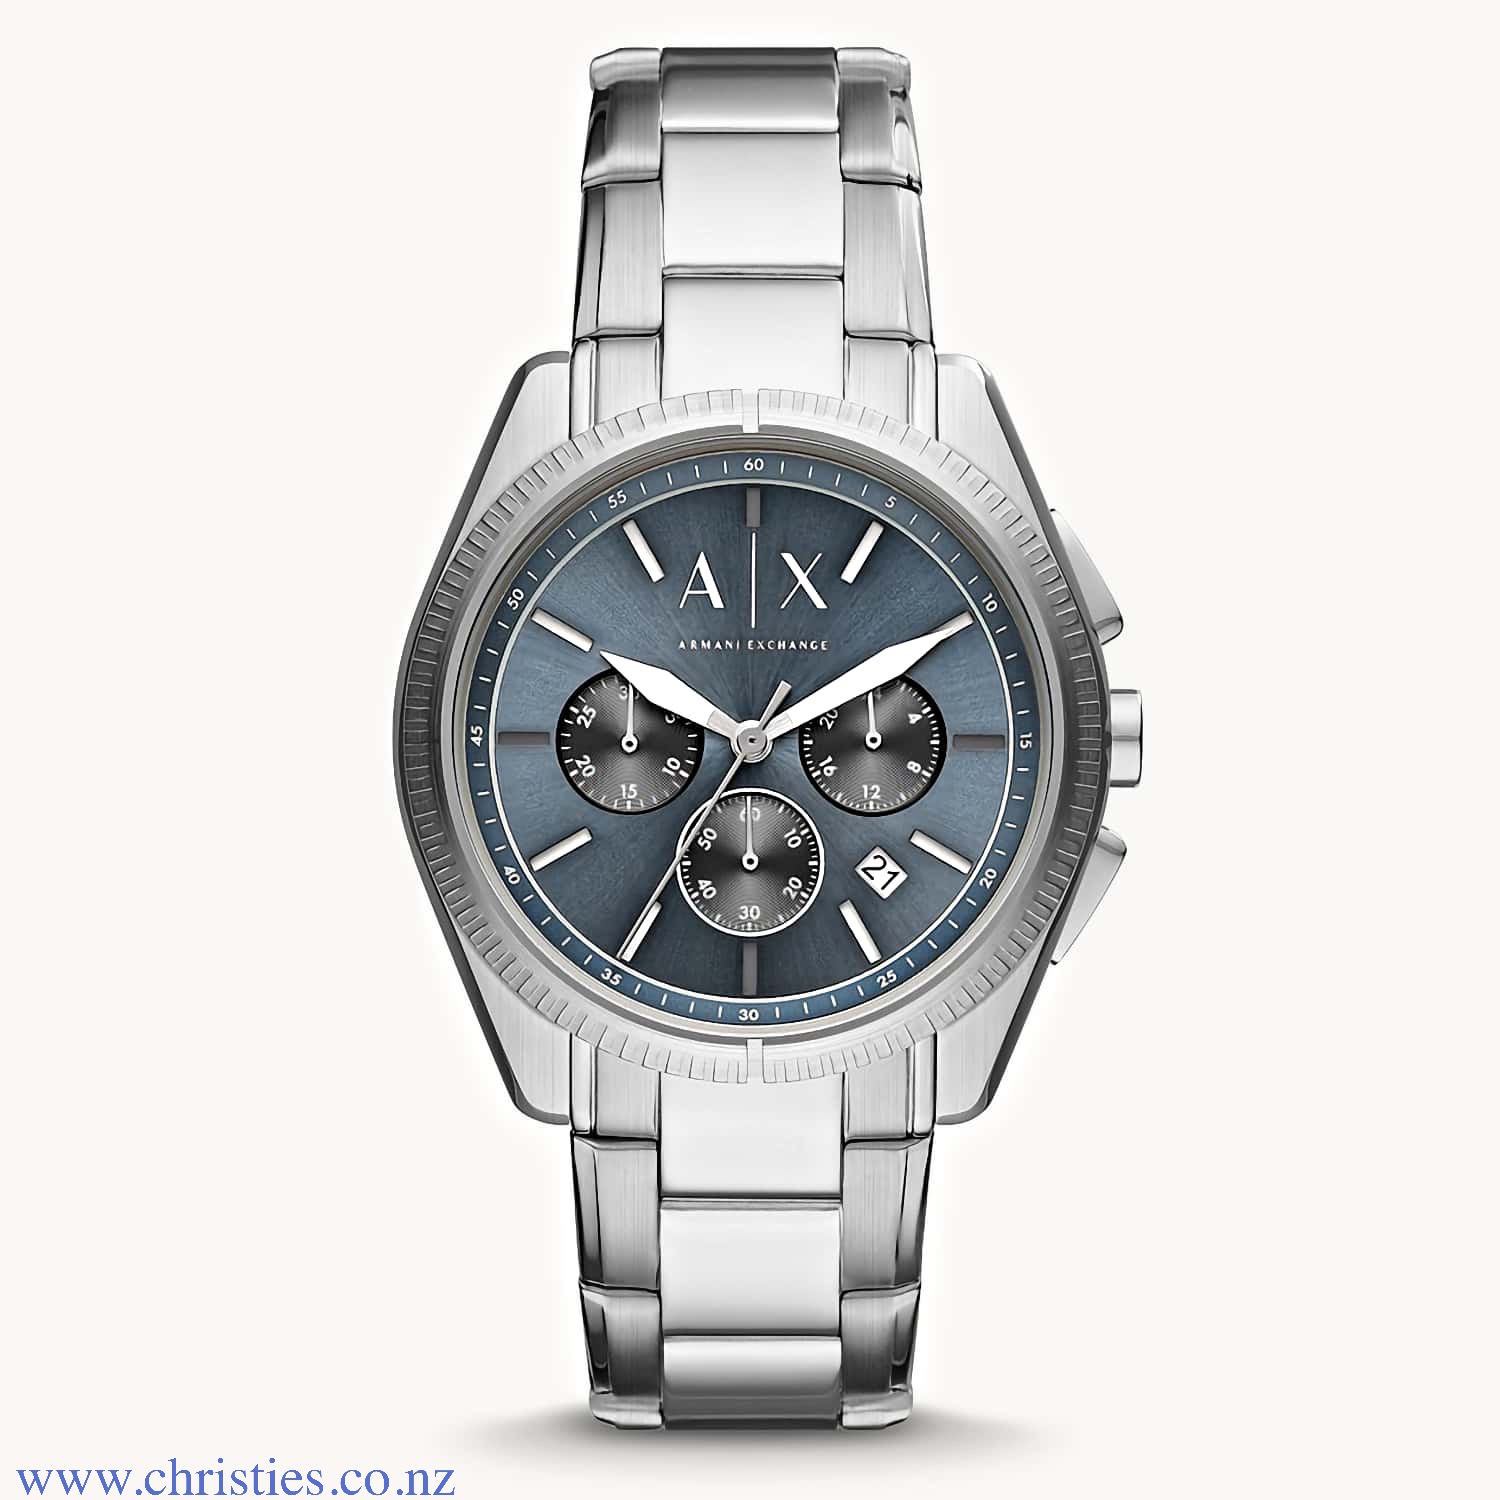 AX2850 A|X  Armani Exchange  Giacomo Chronograph Watch. The Armani Exchange Giacomo AX2850 is a practical and attractive gents watch. Case is made out of stainless steel with a  blue dial. LAYBUY - Pay it easy, in 6 weekly payments and have it now. Only p